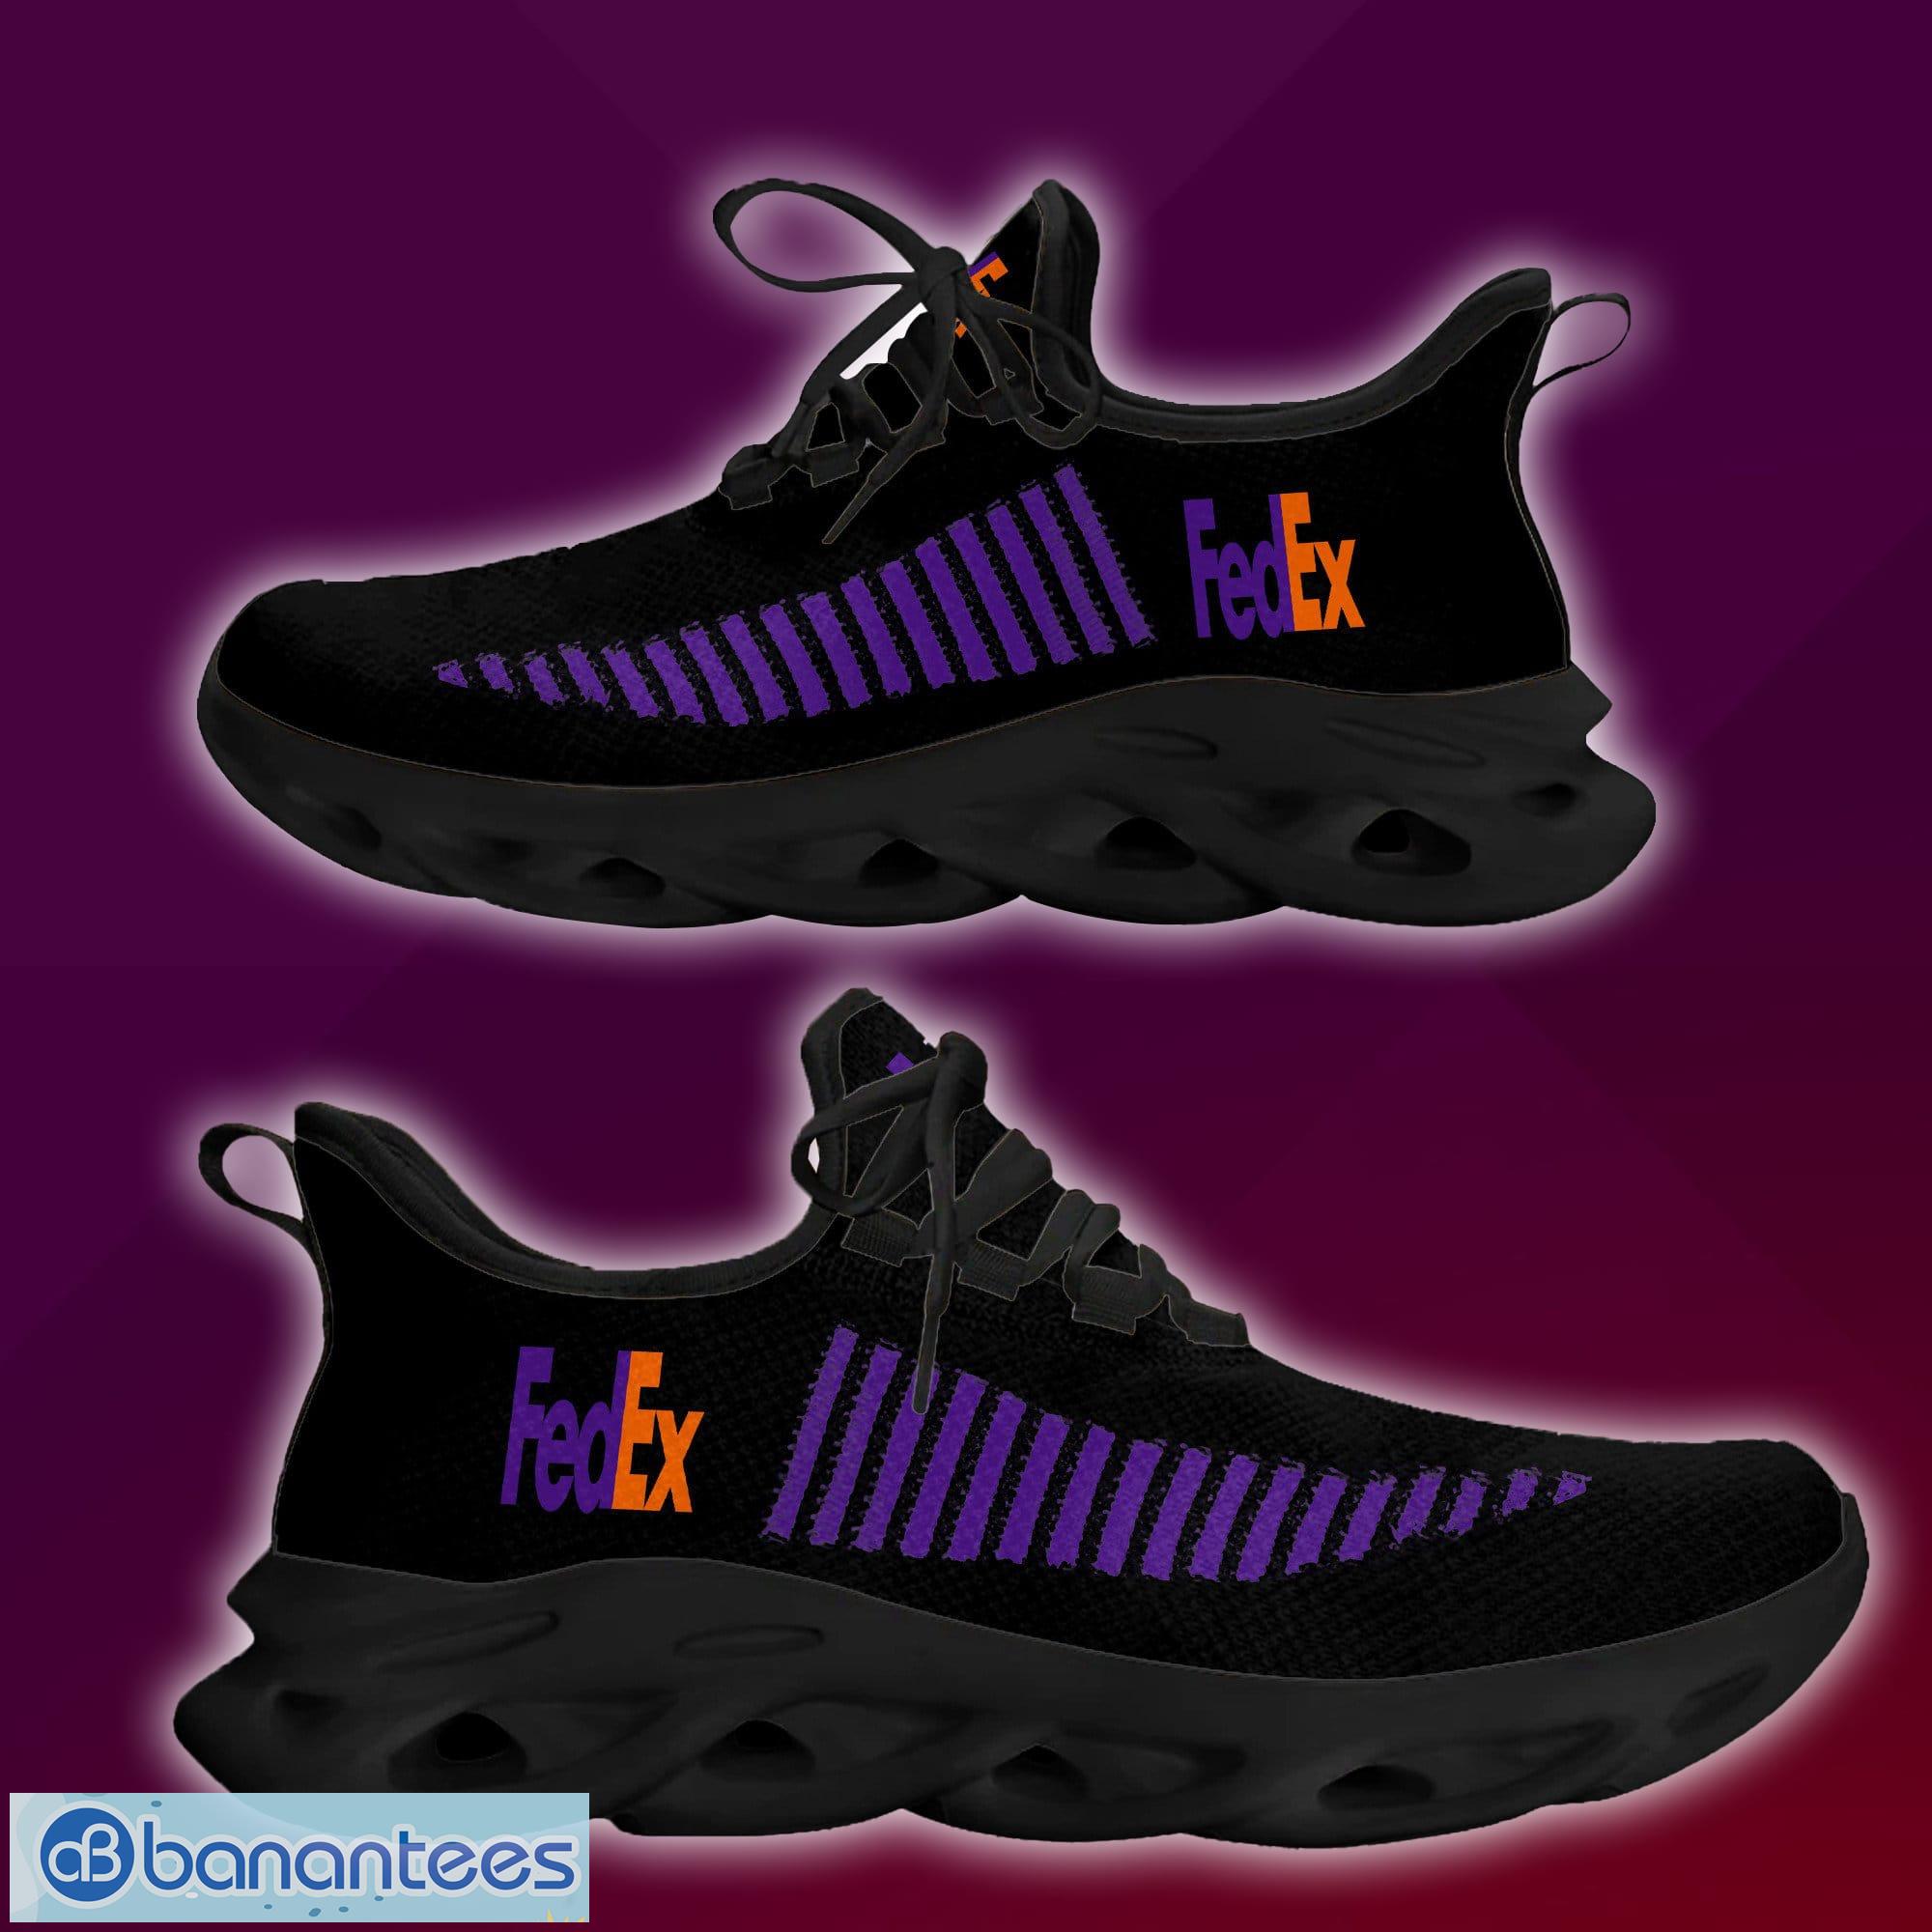 fedex Brand New Logo Max Soul Sneakers Chic Sport Shoes Gift